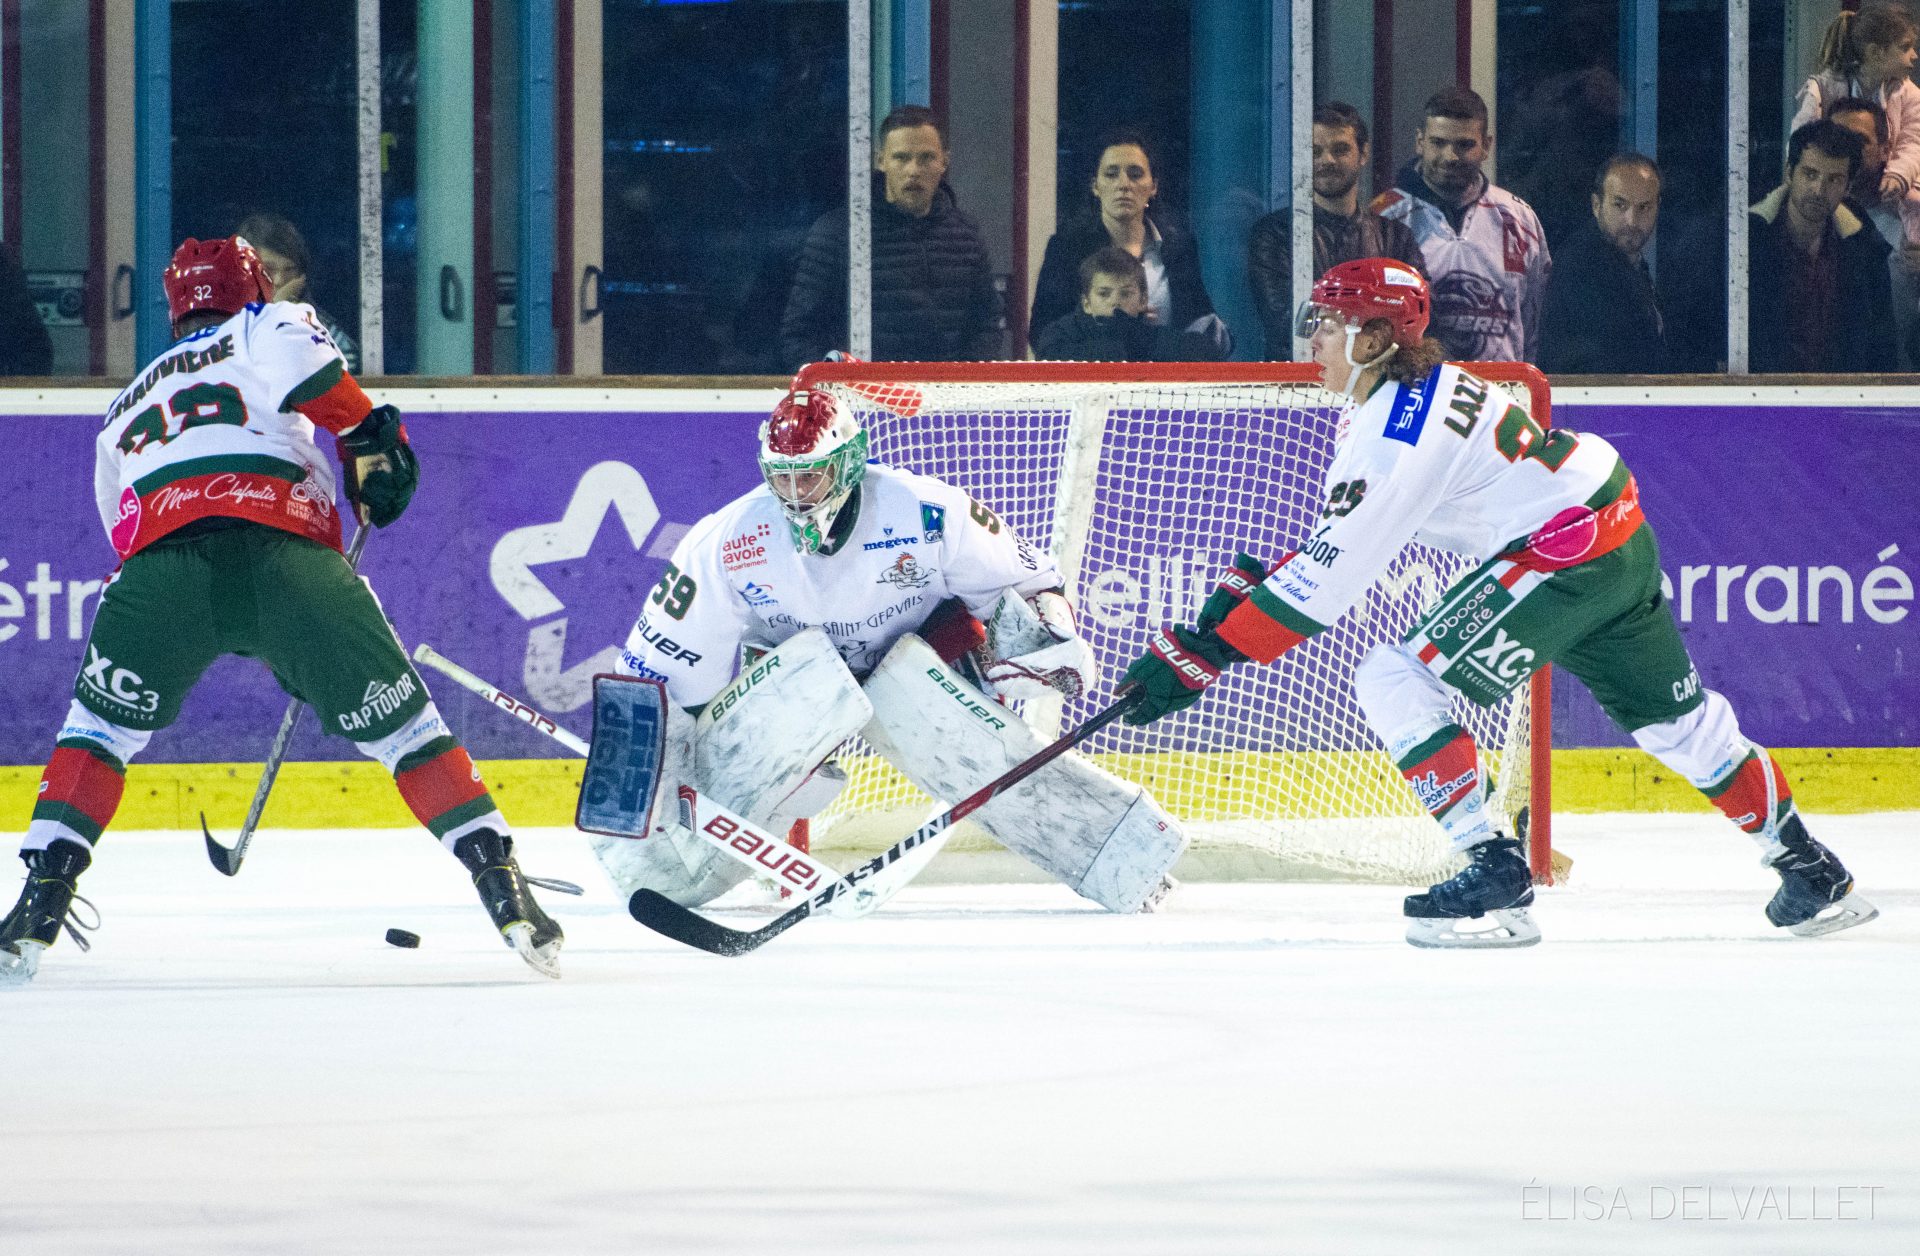 Places VIP - Vipers Hockey sur glace Montpellier